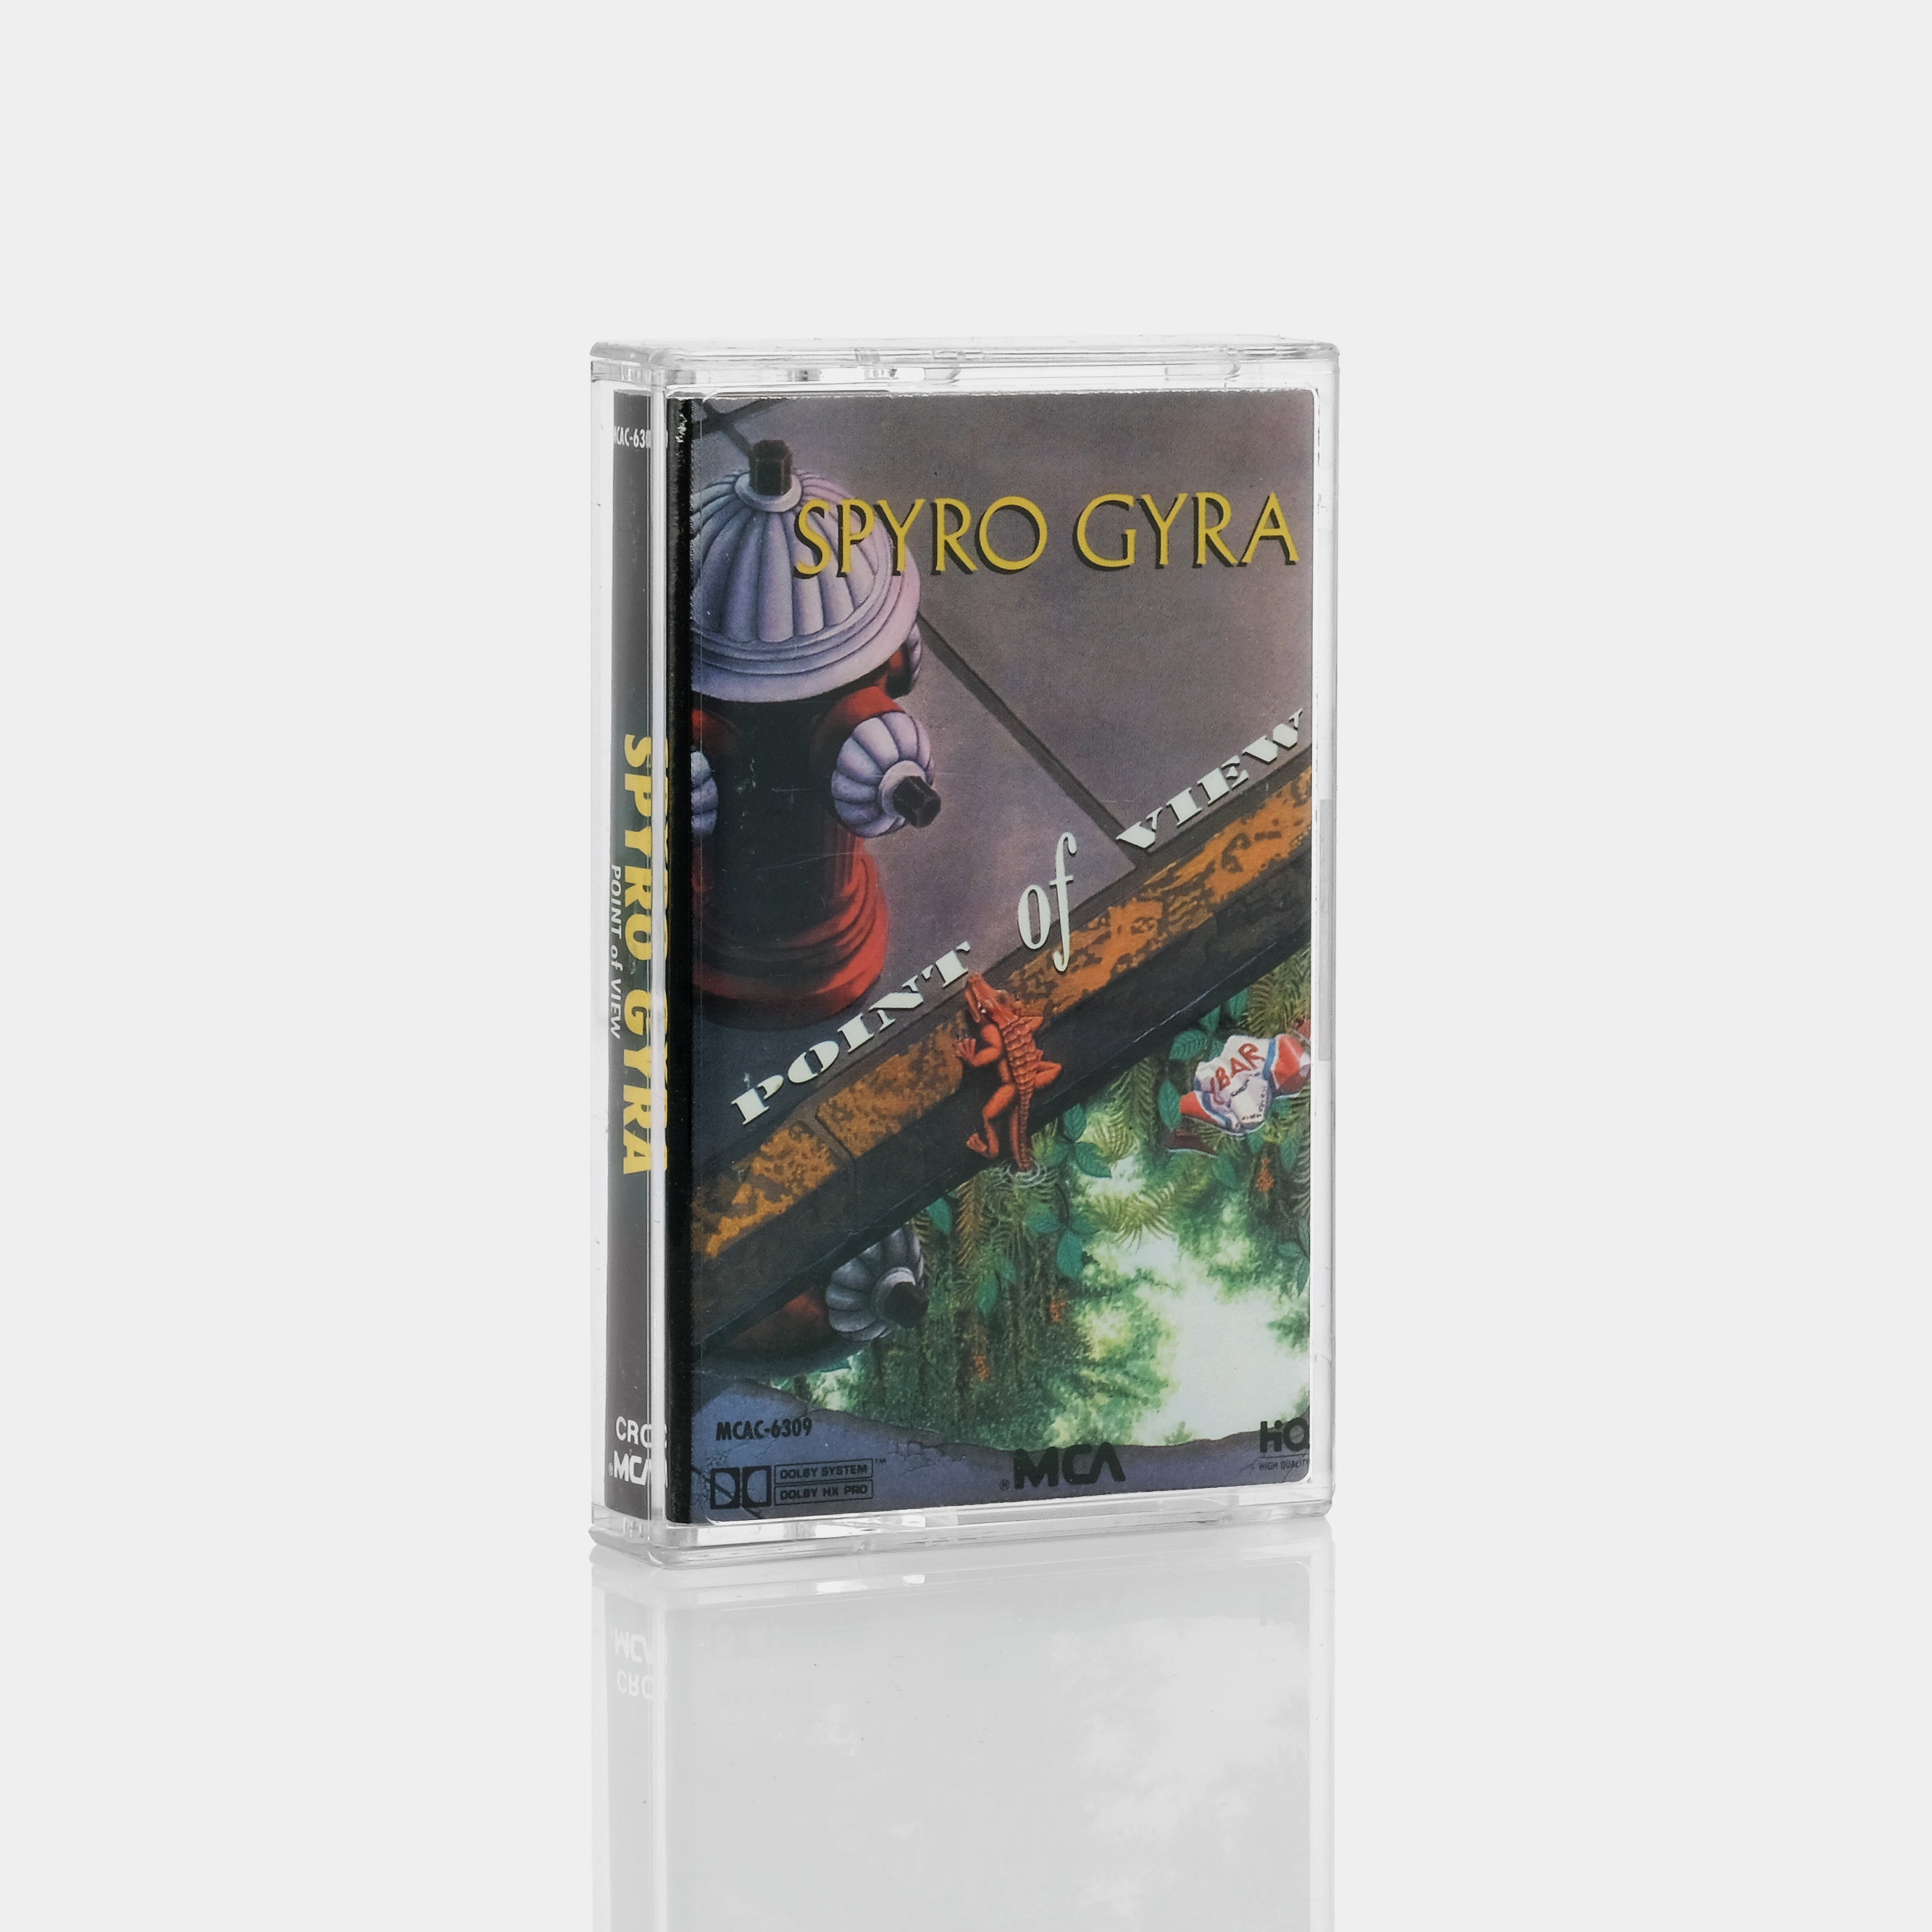 Spyro Gyra - Point Of View Cassette Tape